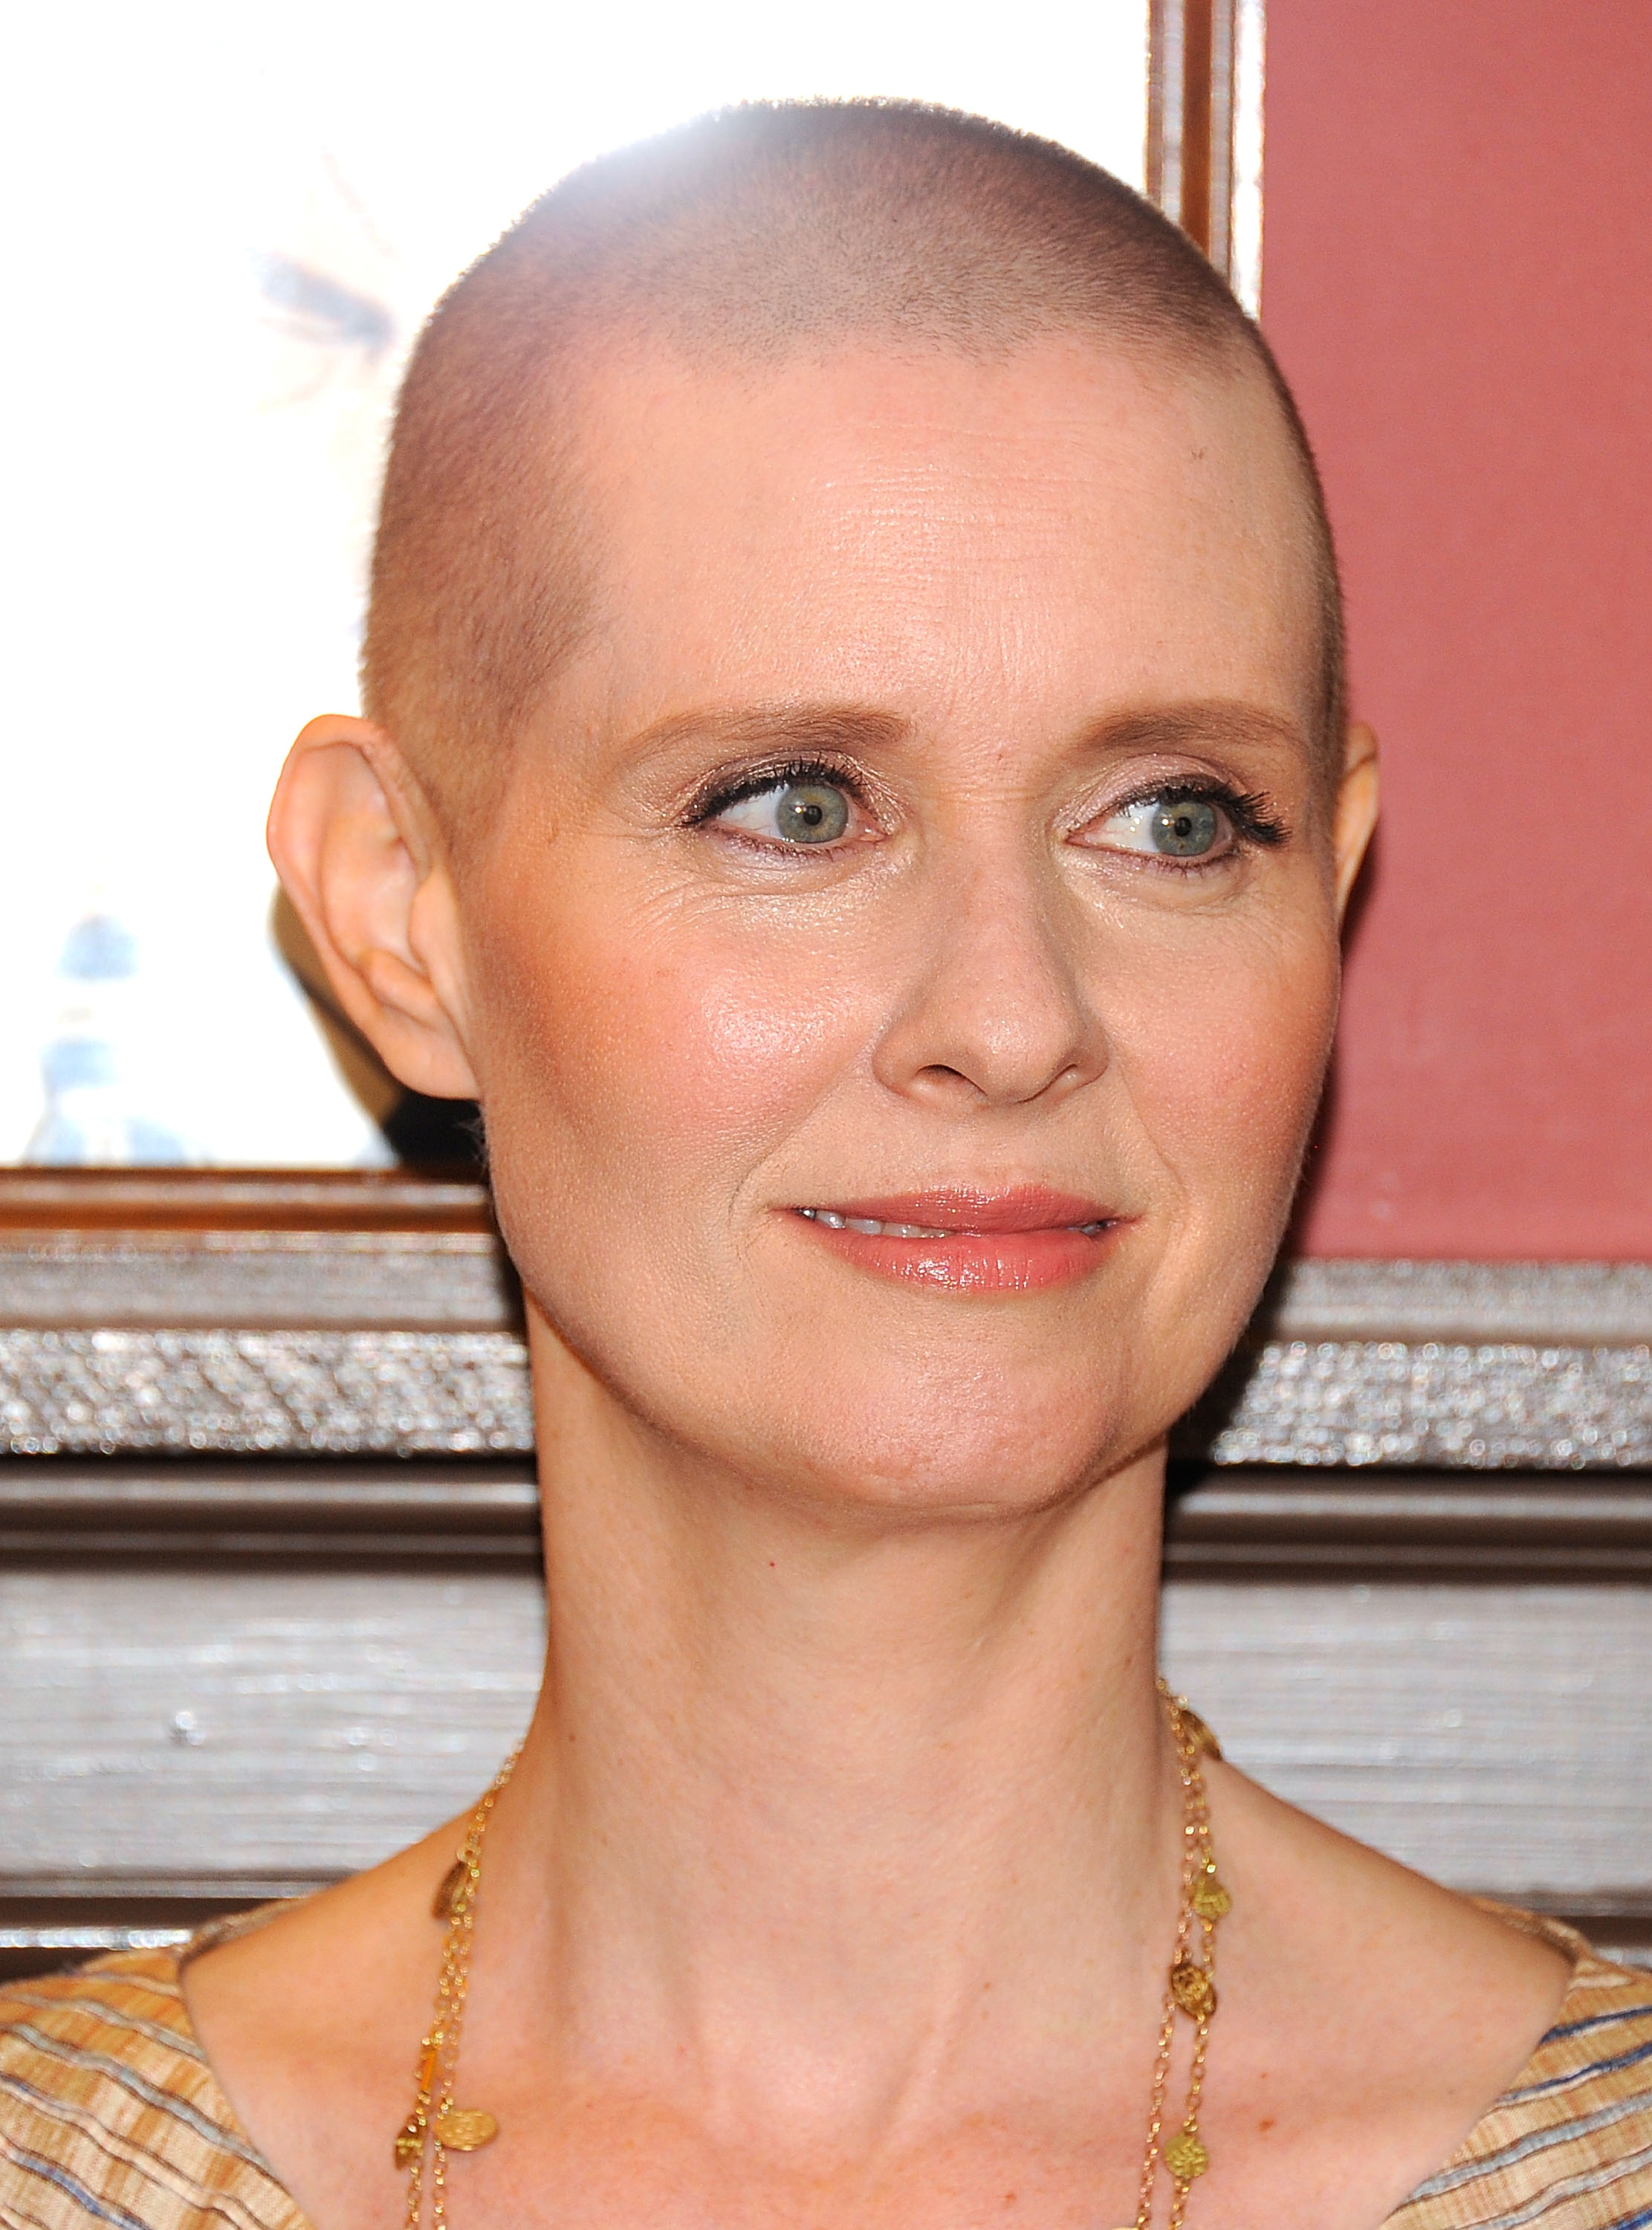 Cynthia Nixon on March 30, 2012, in New York City. | Source: Getty Images